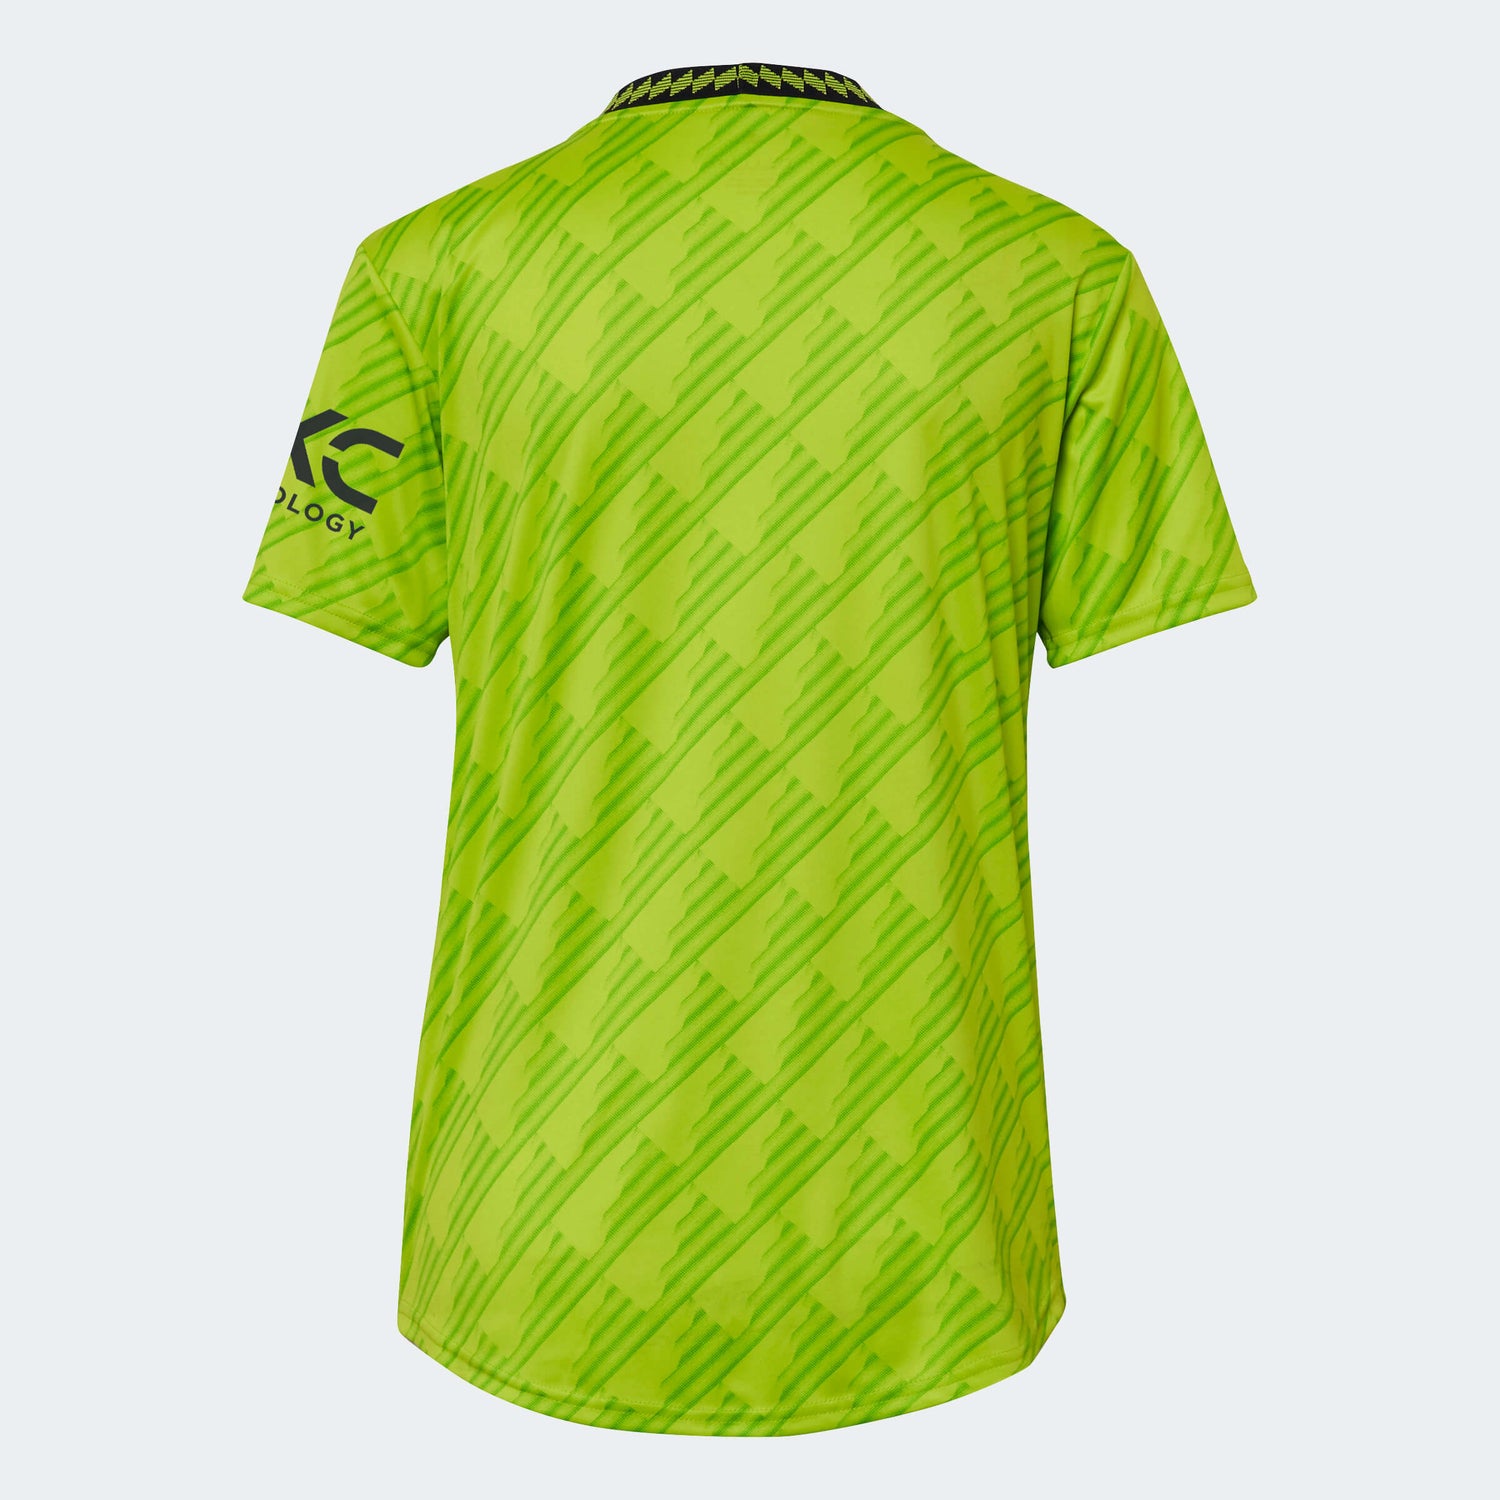 adidas 2022-23 Manchester United Women's Third Jersey - Solar Slime (Back)